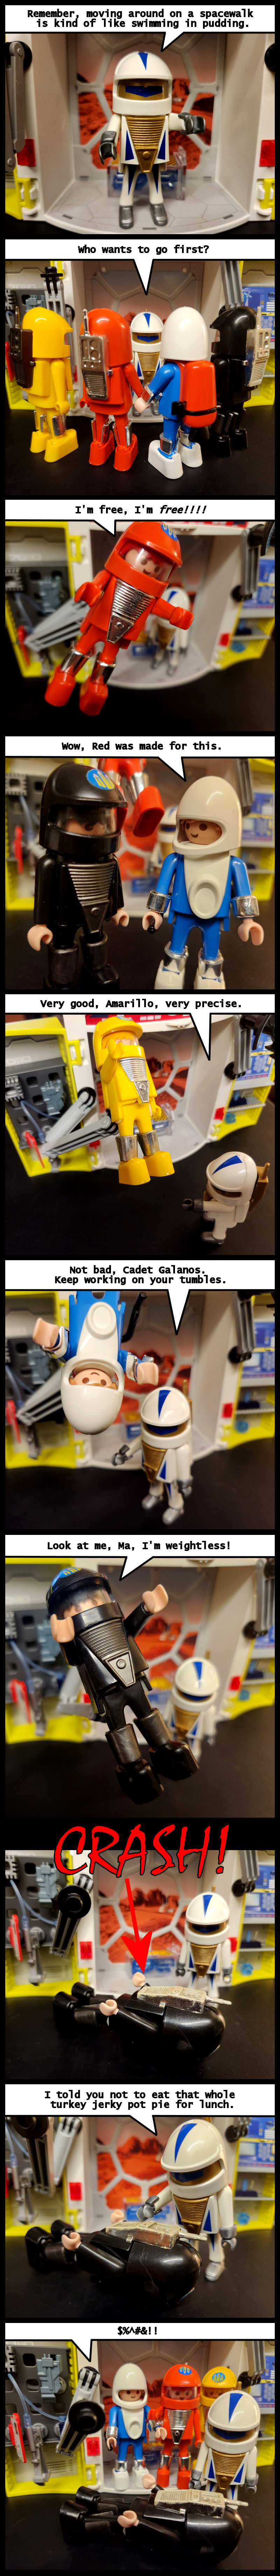 Playmobil Space the Comic Part 2